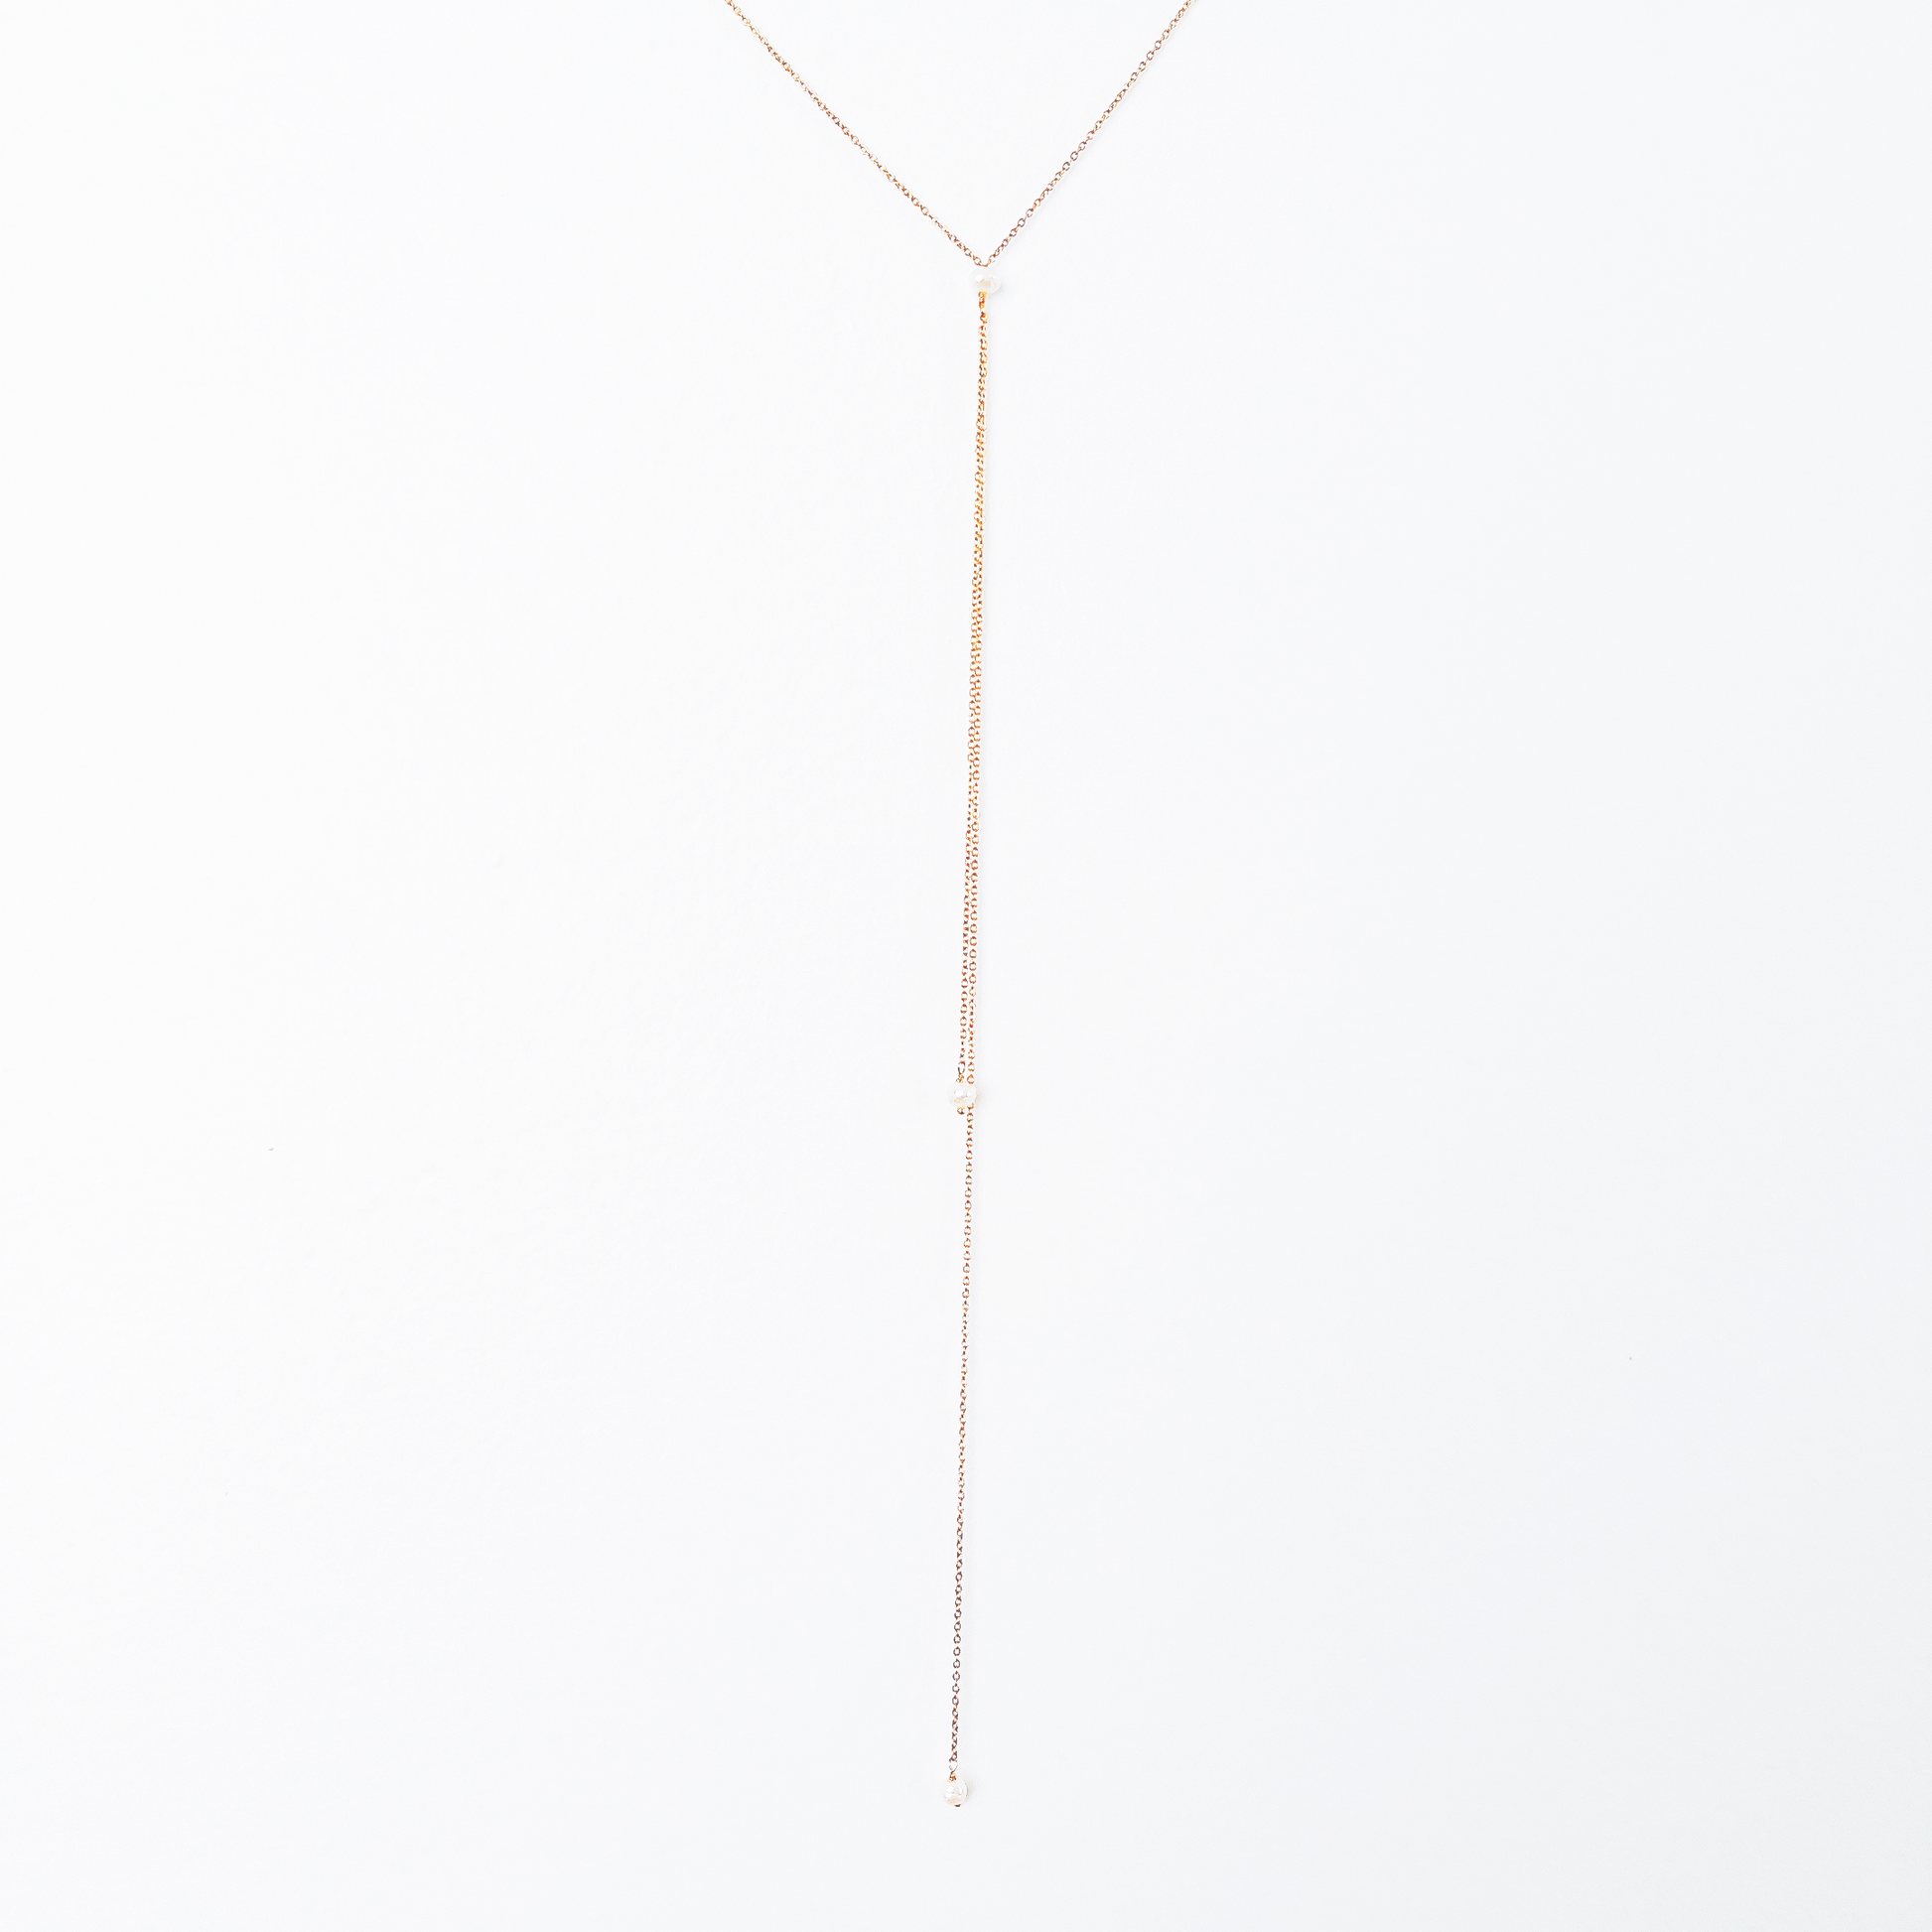 Short and long drop necklace with a white pearl pendant